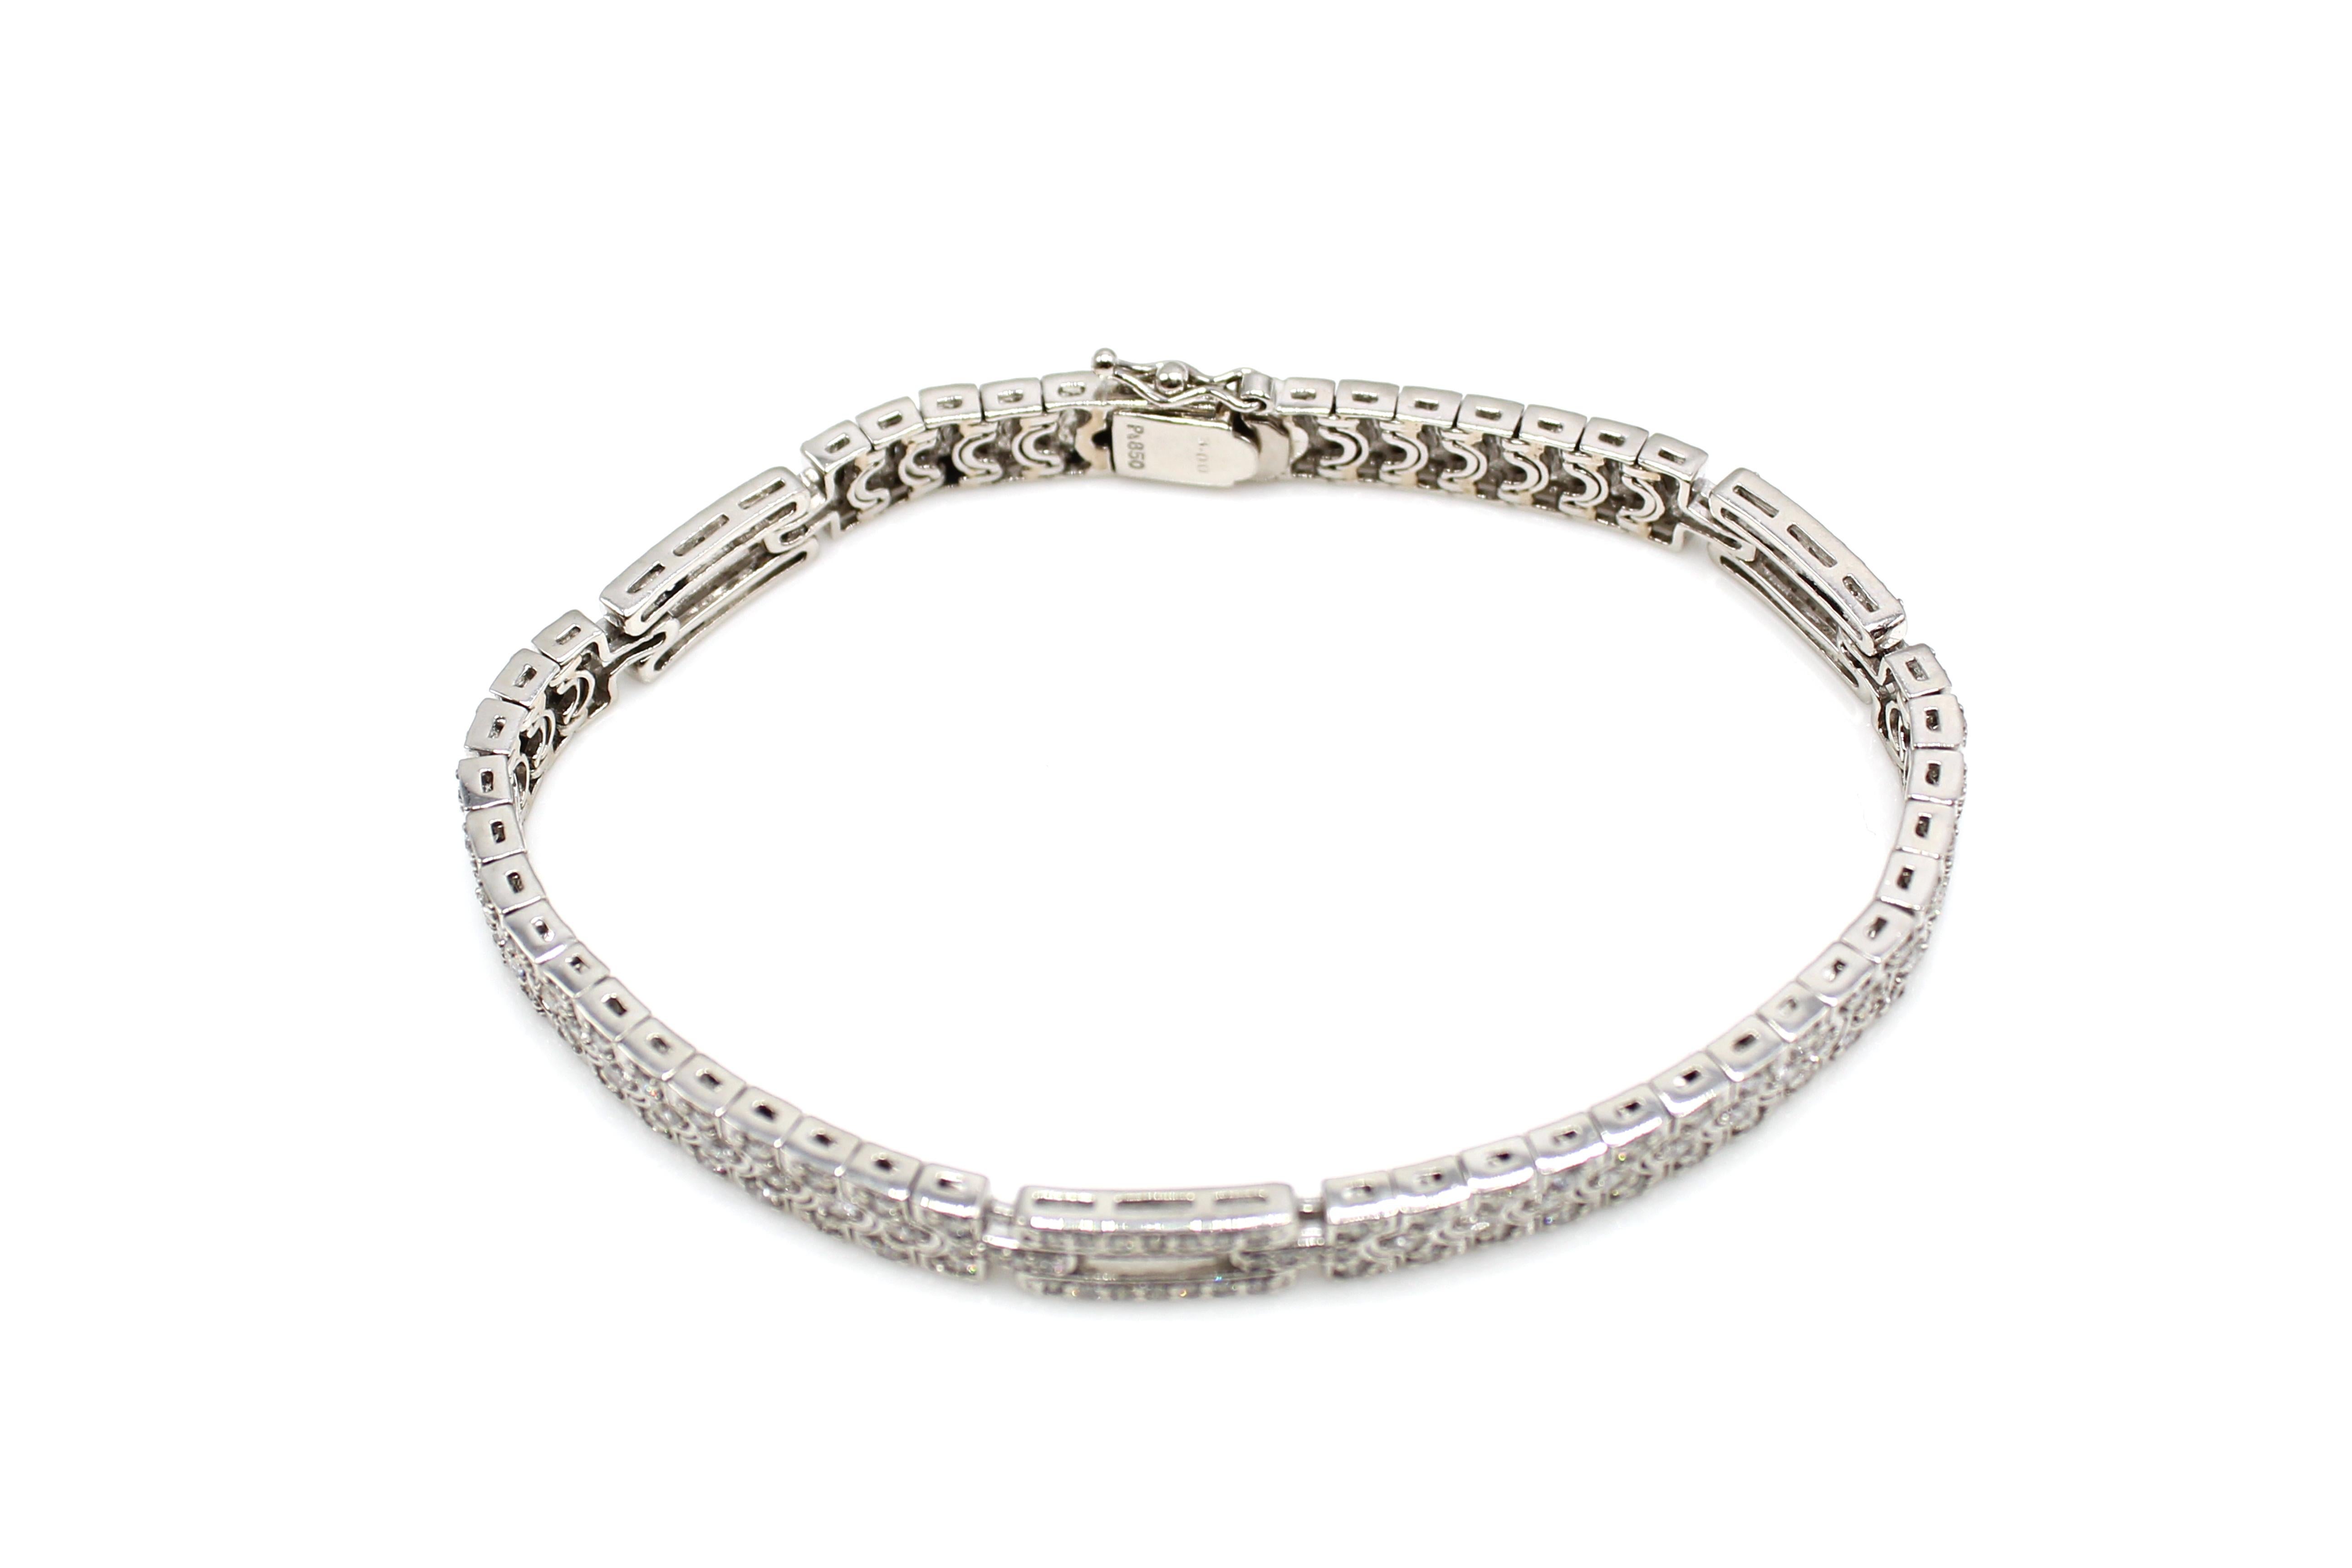 This absolutely beautiful platinum bracelet is set with 192 round cut diamonds. The diamonds are perfectly matched in color, clarity and cut to show off a gorgeous stream of sparkling white, which elegantly and extremely comfortably falls around the